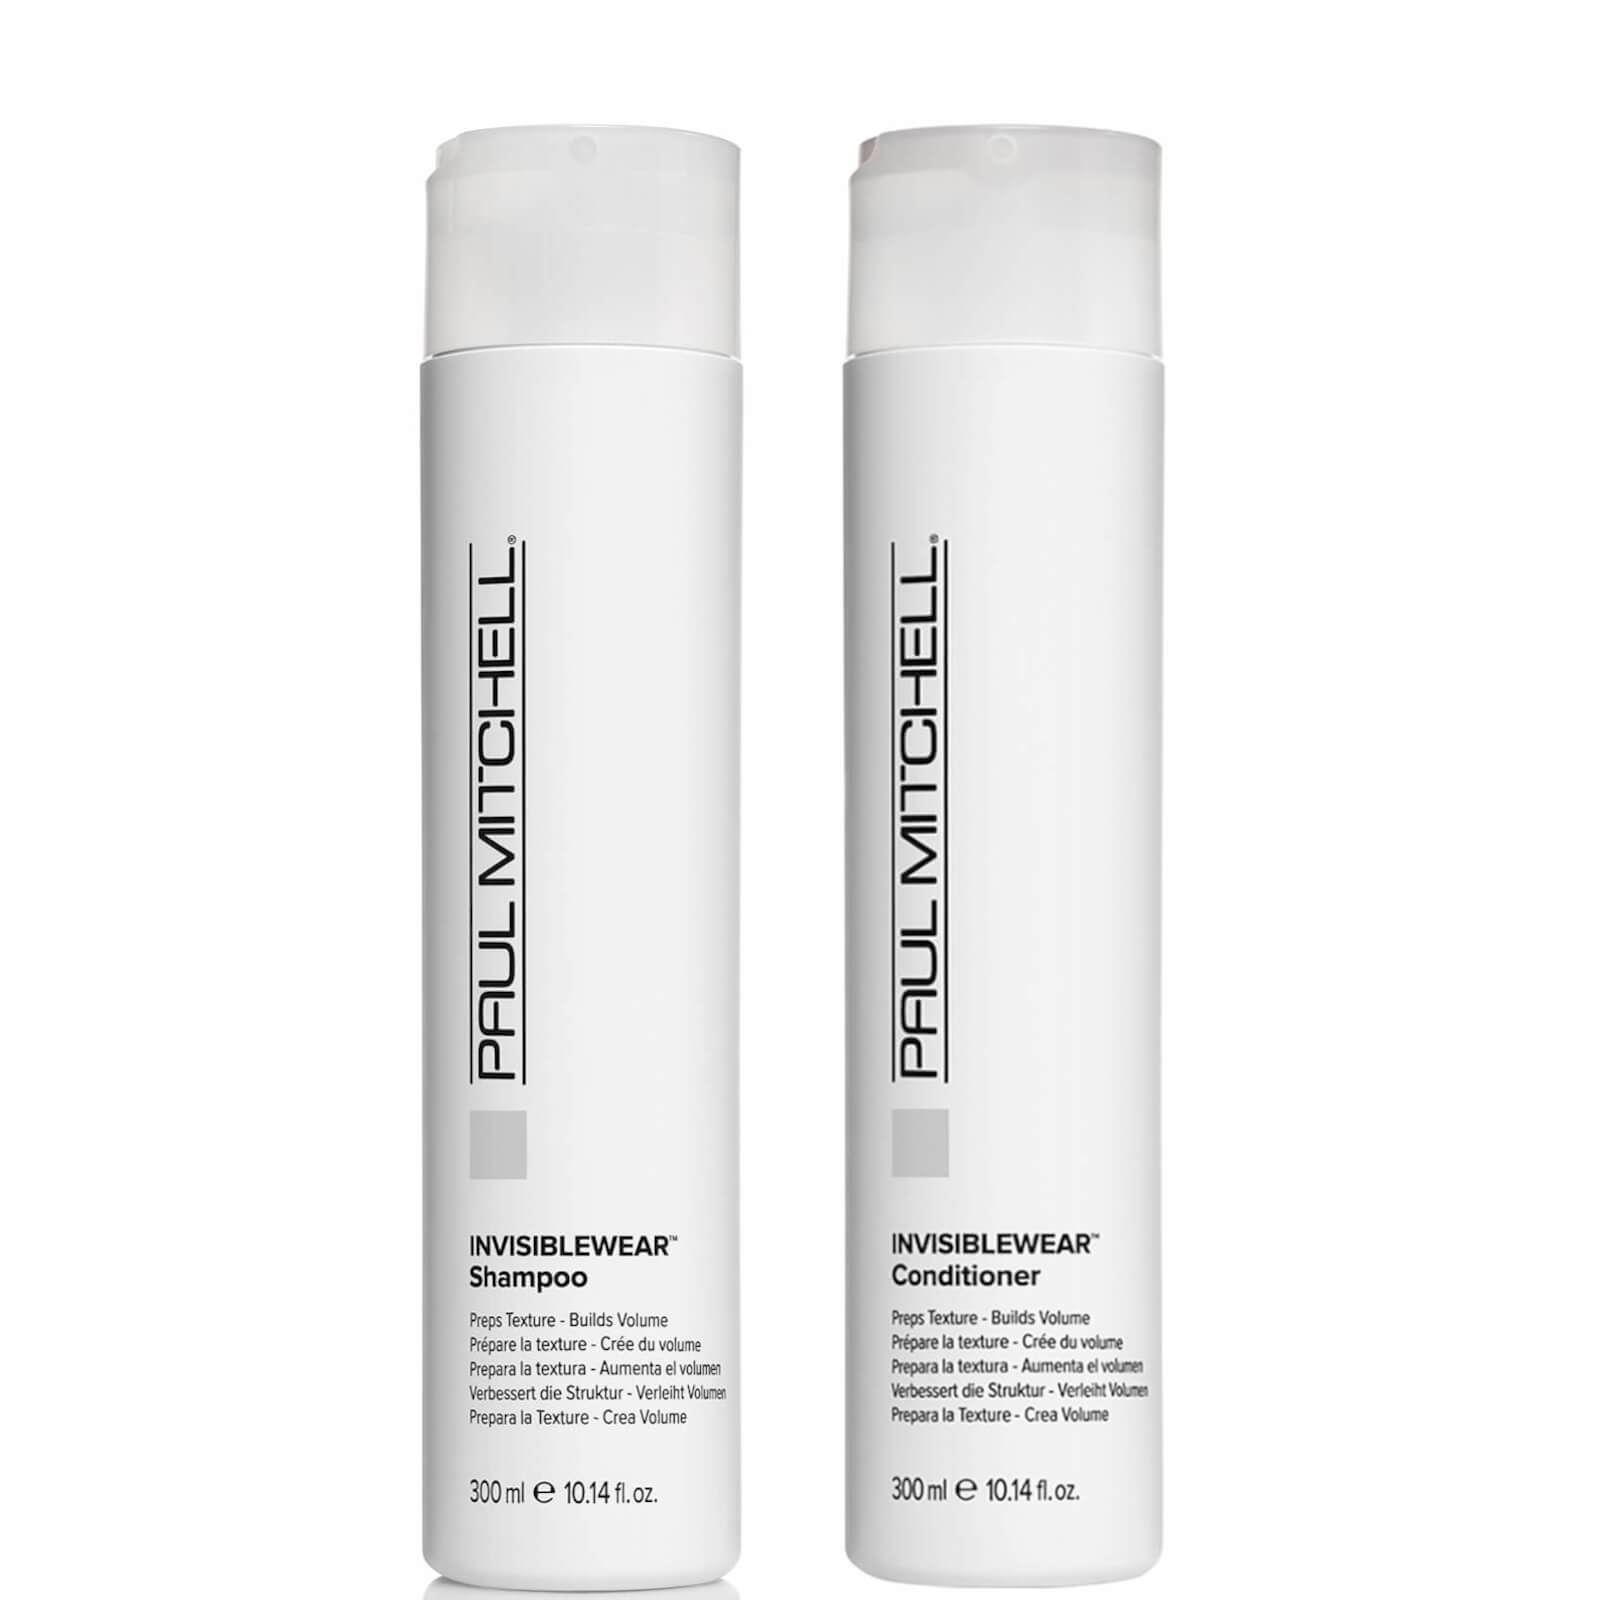 Paul Mitchell Invisiblewear Shampoo and Conditioner Duo (2 x 300ml)